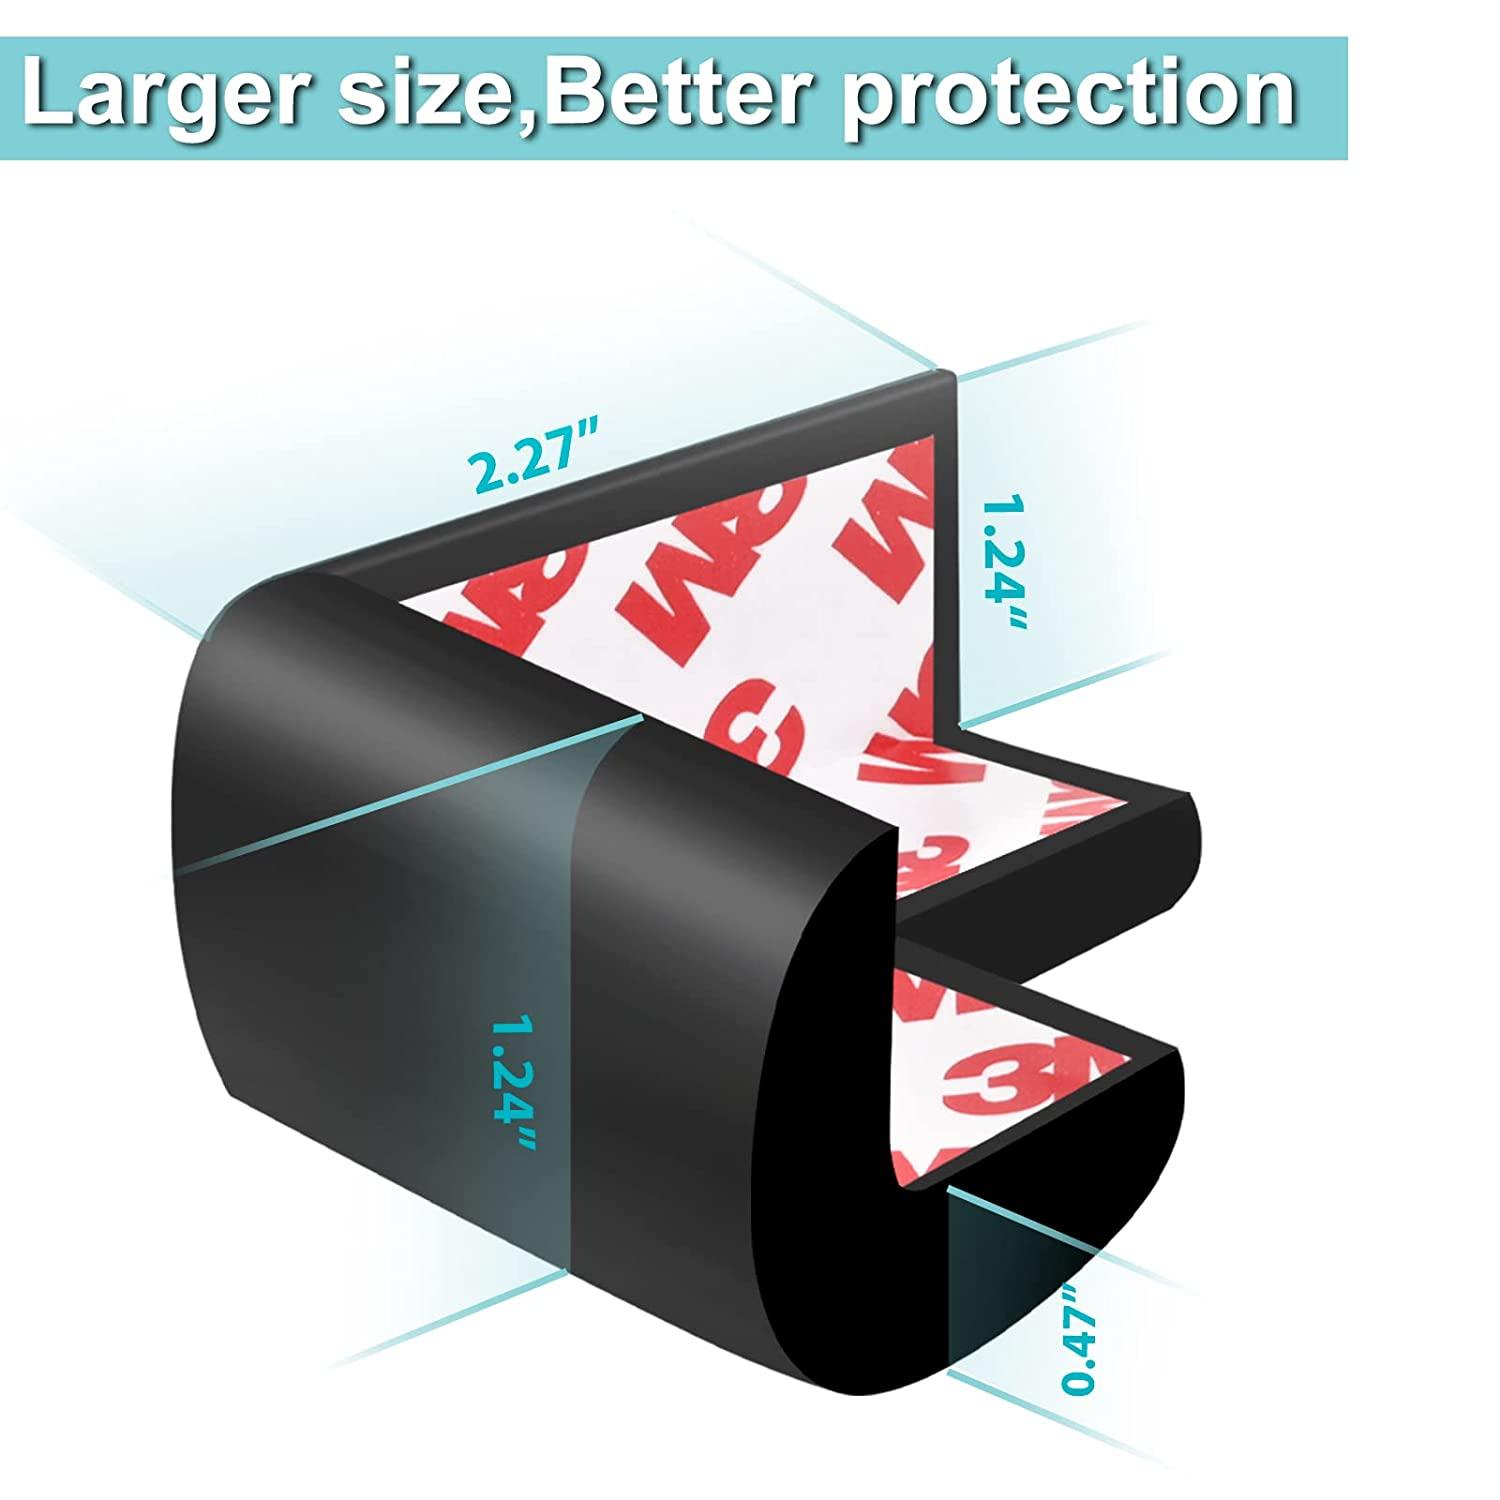 Corner Protection and Edge Protection